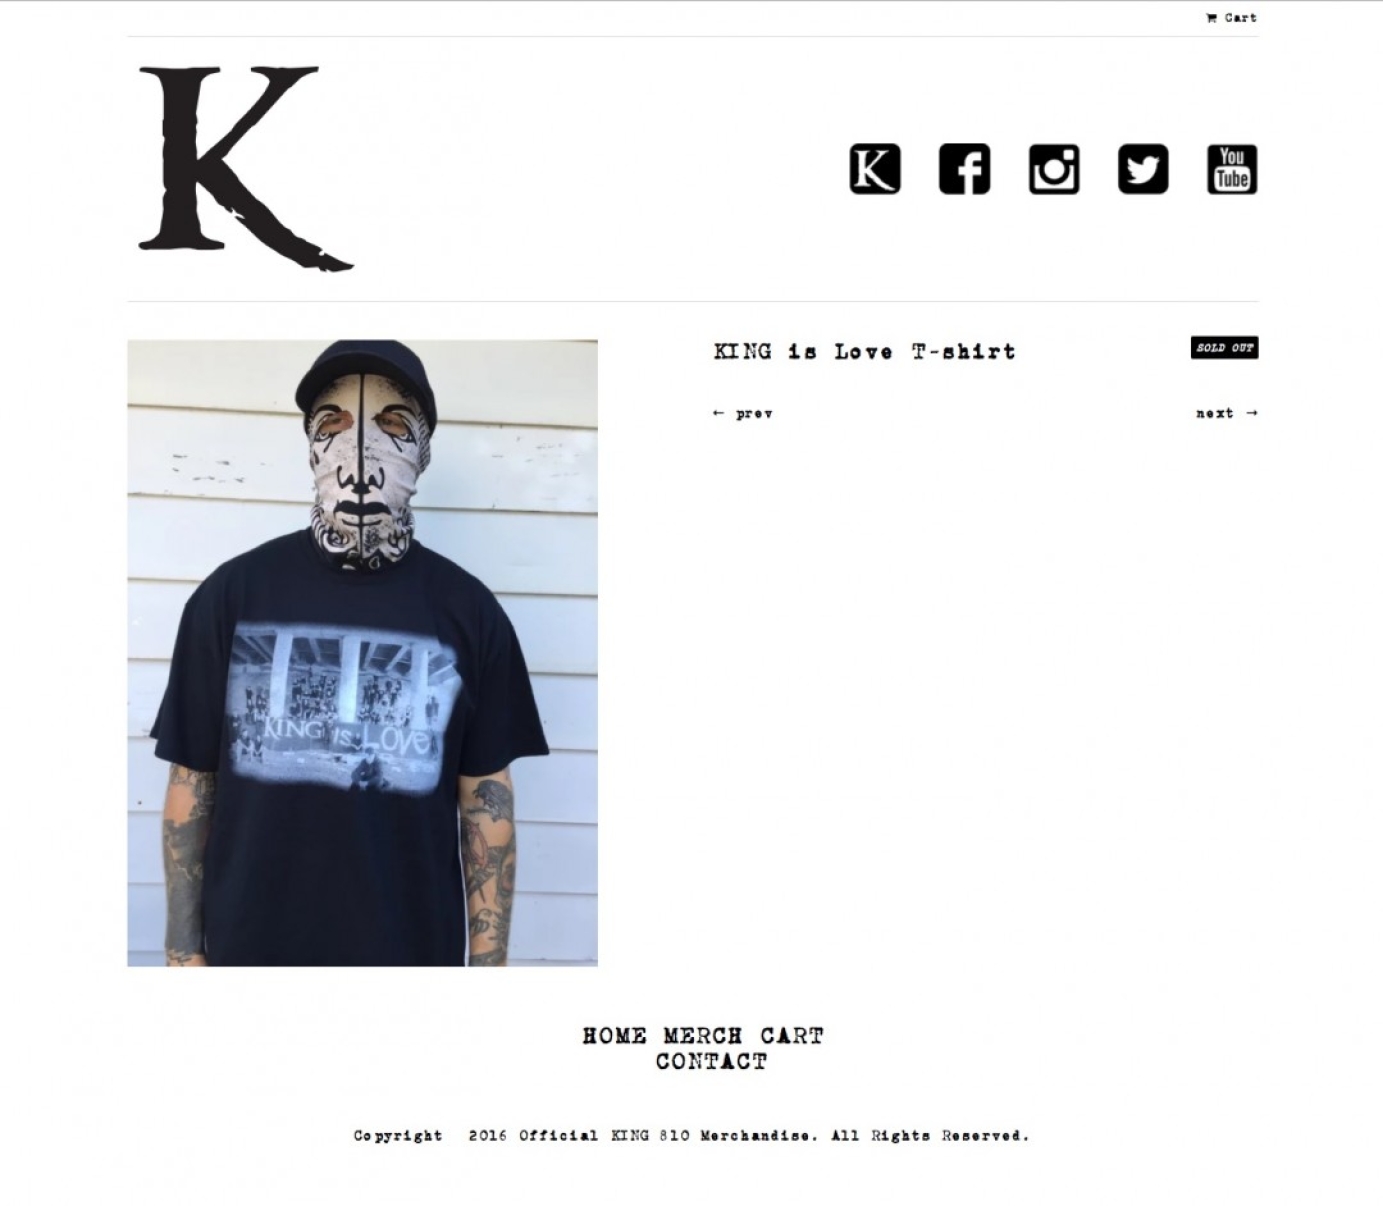 Website for KING 810 by Frequency